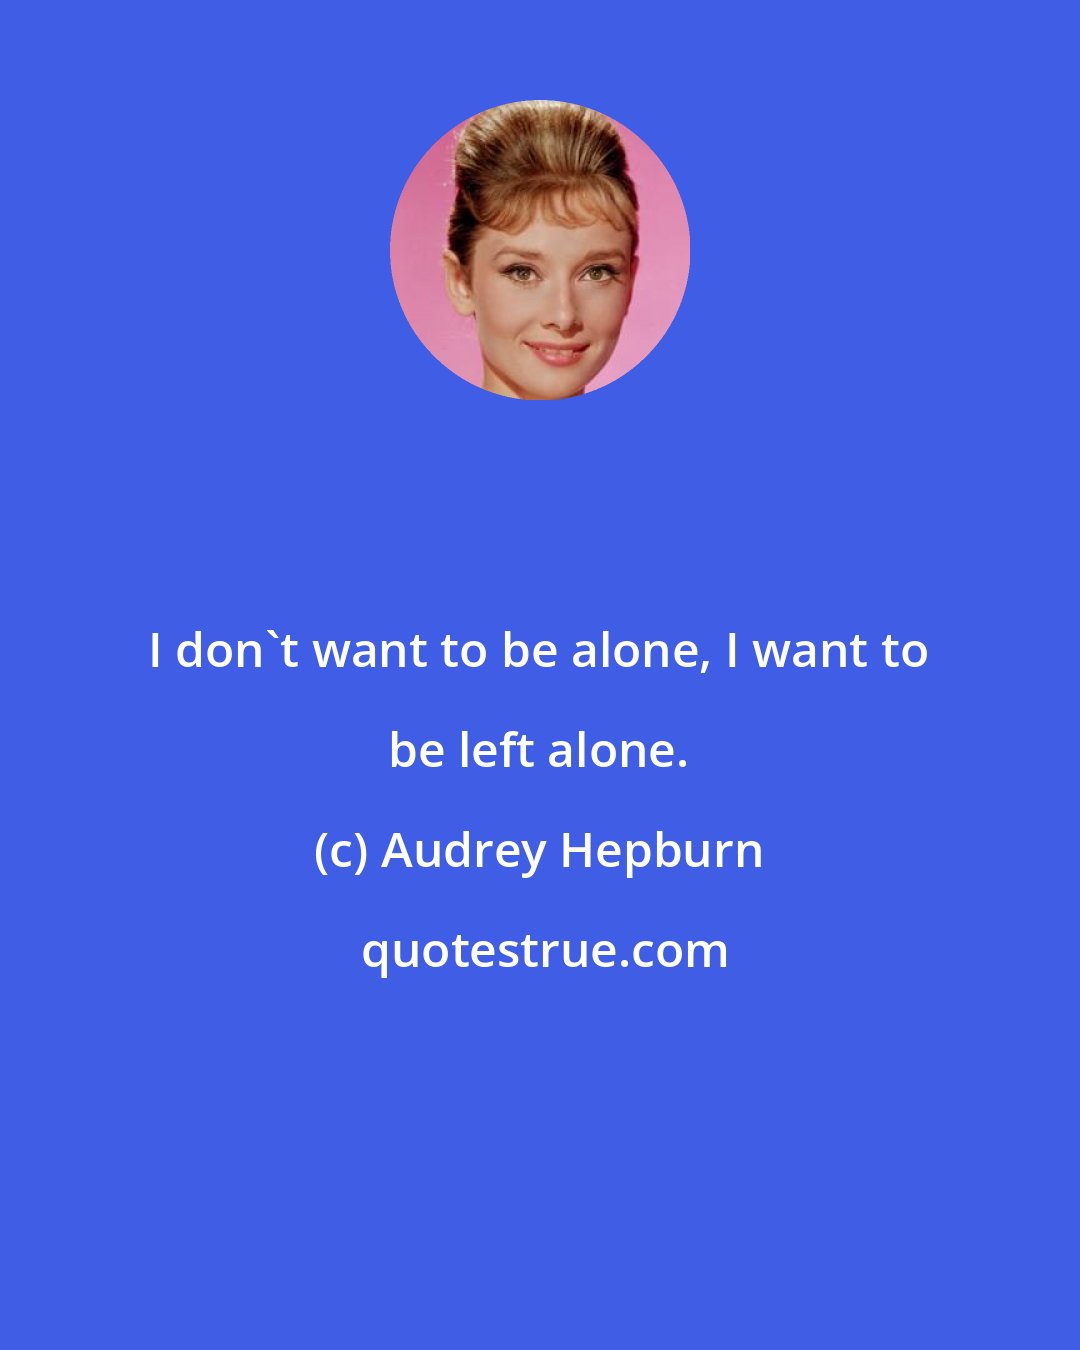 Audrey Hepburn: I don't want to be alone, I want to be left alone.